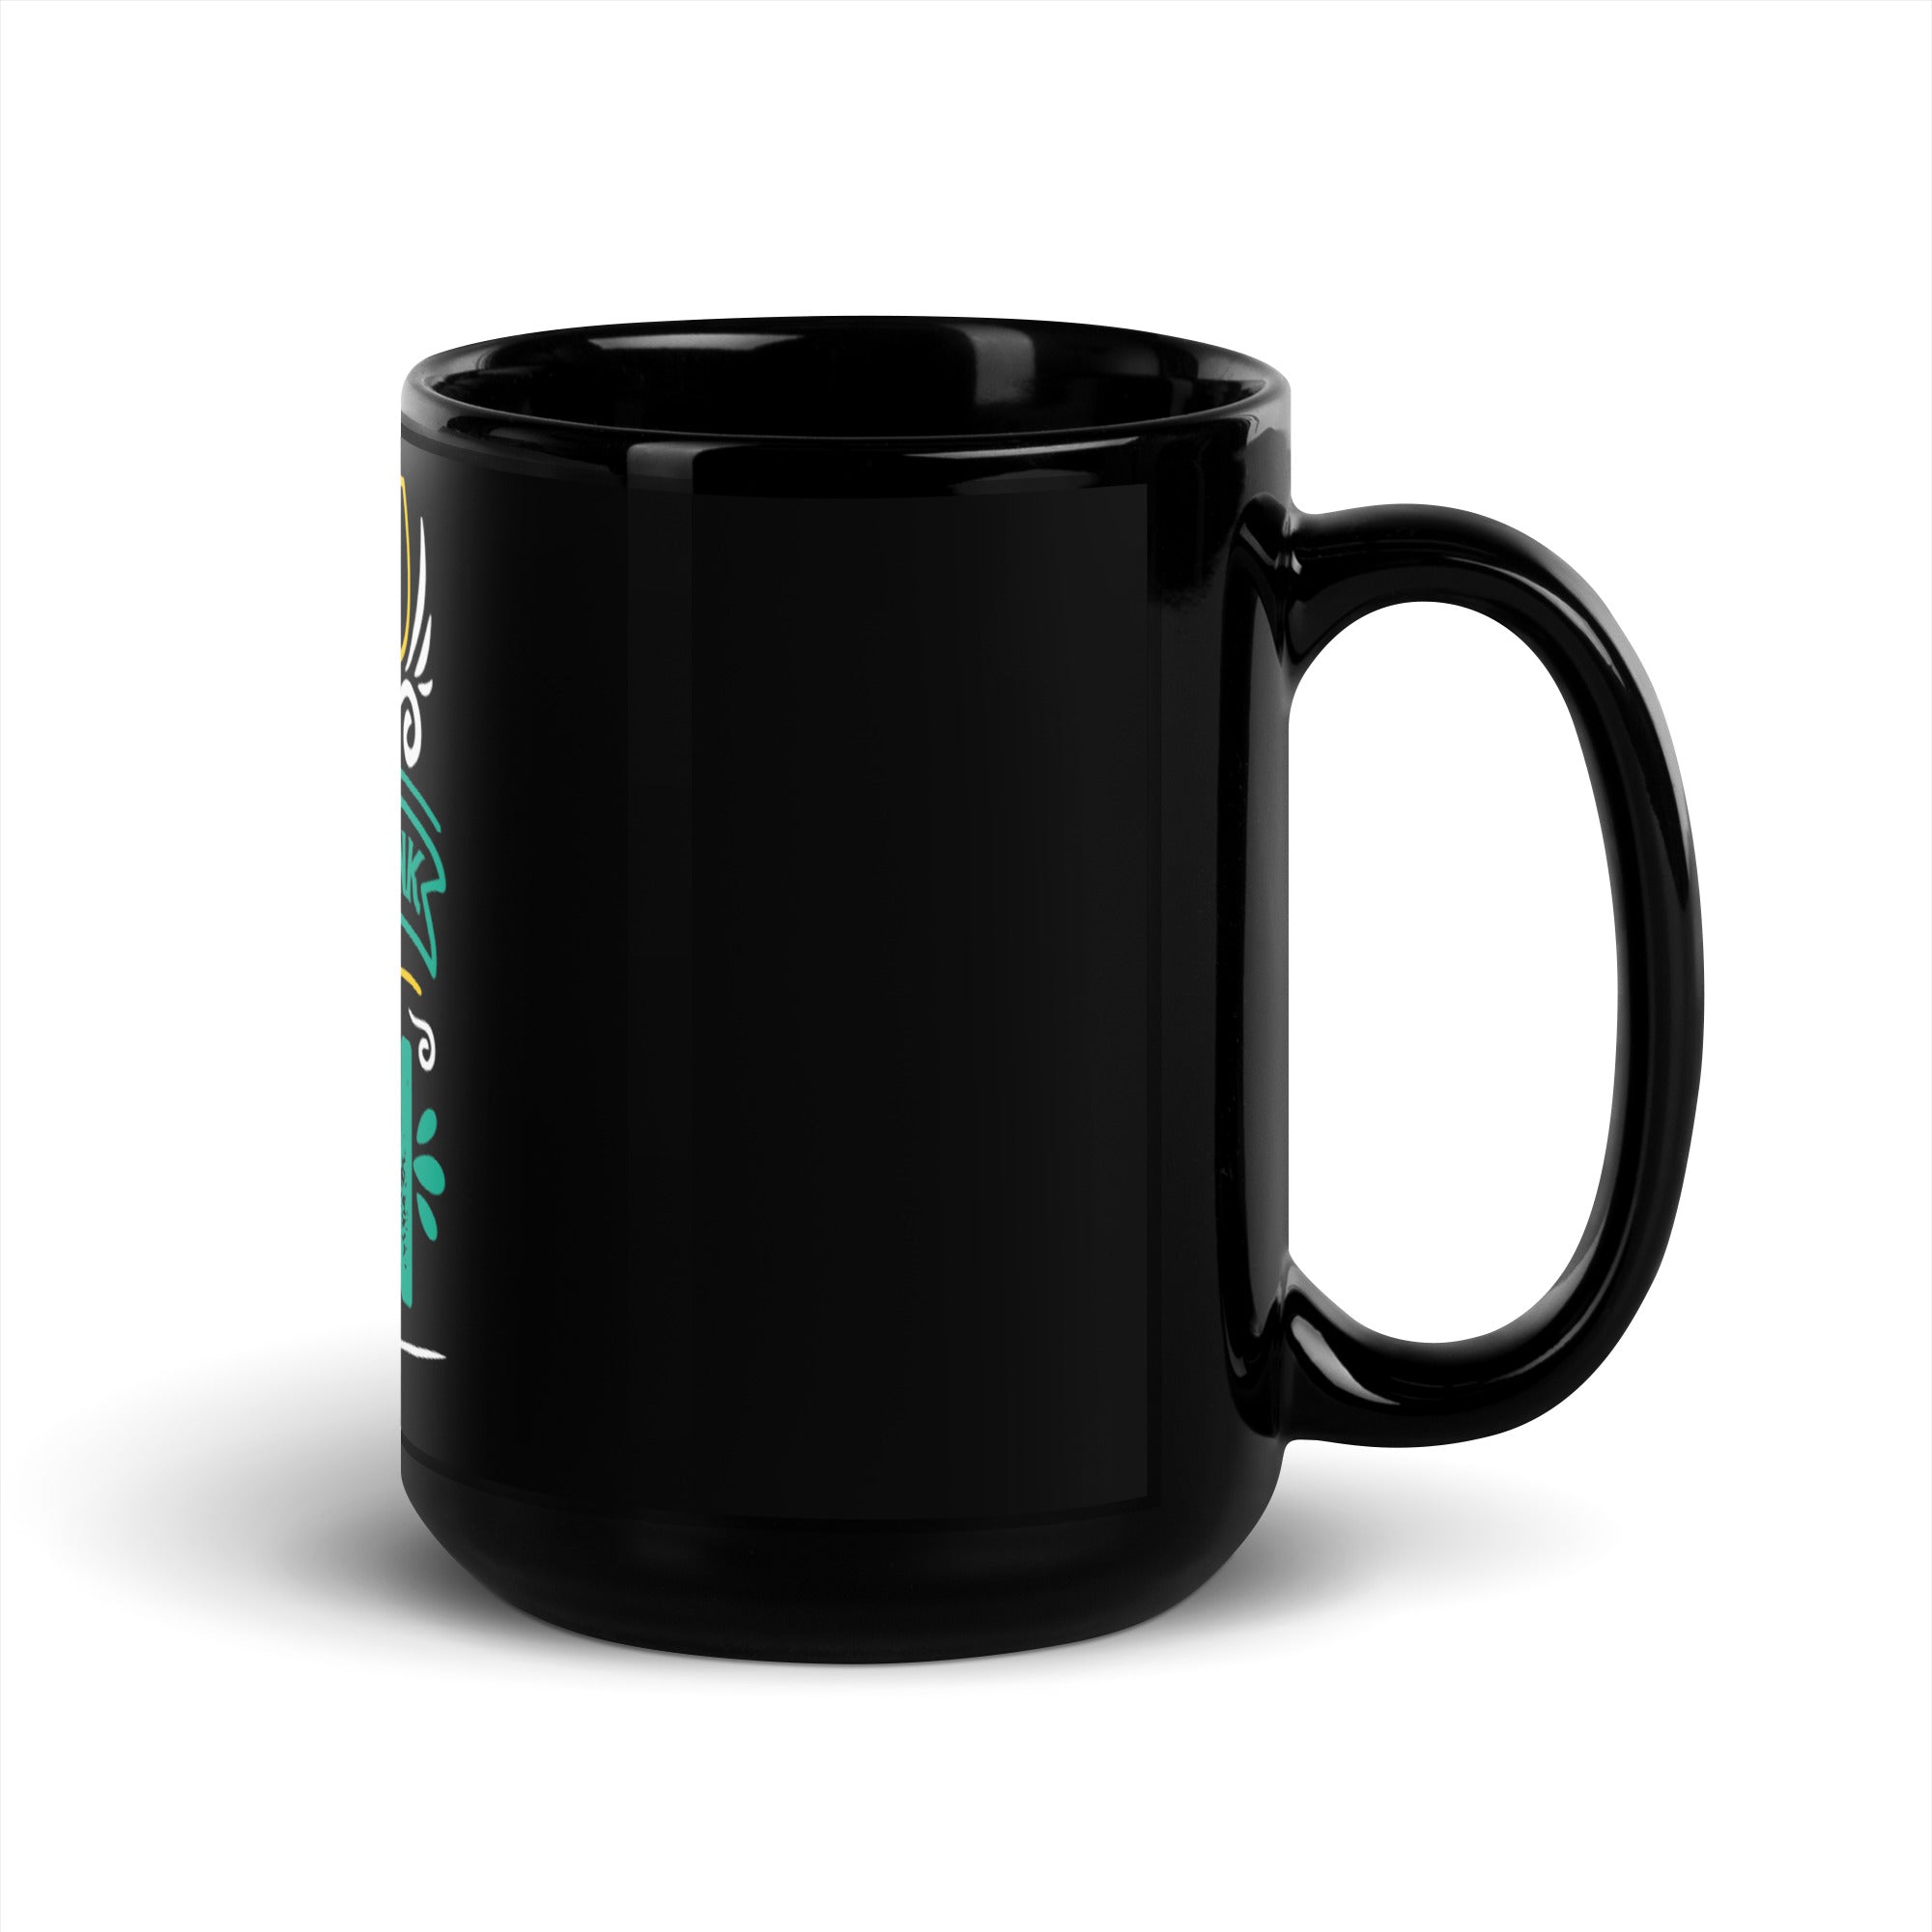 You Can If You Think You Can - Black Glossy Mug